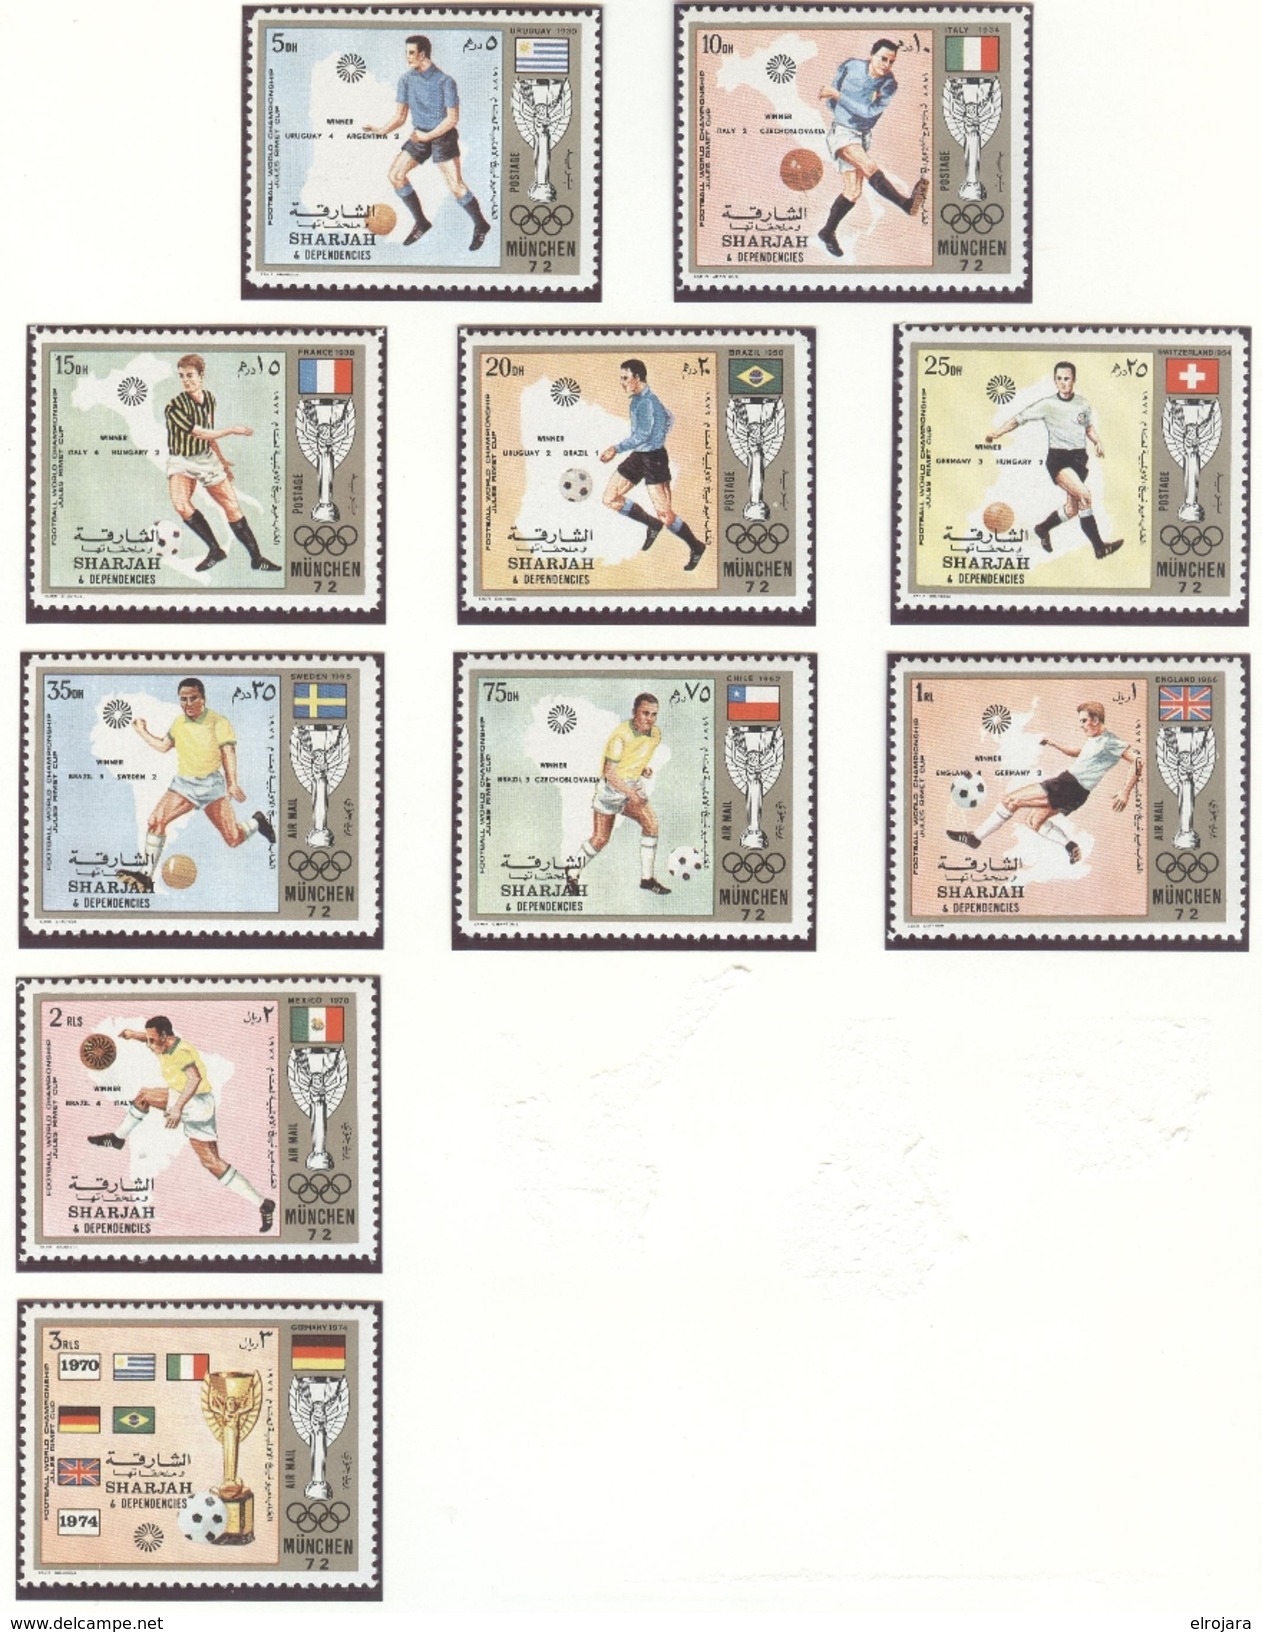 SHARJAH Perforated Set Mint Without Hinge - 1974 – West Germany